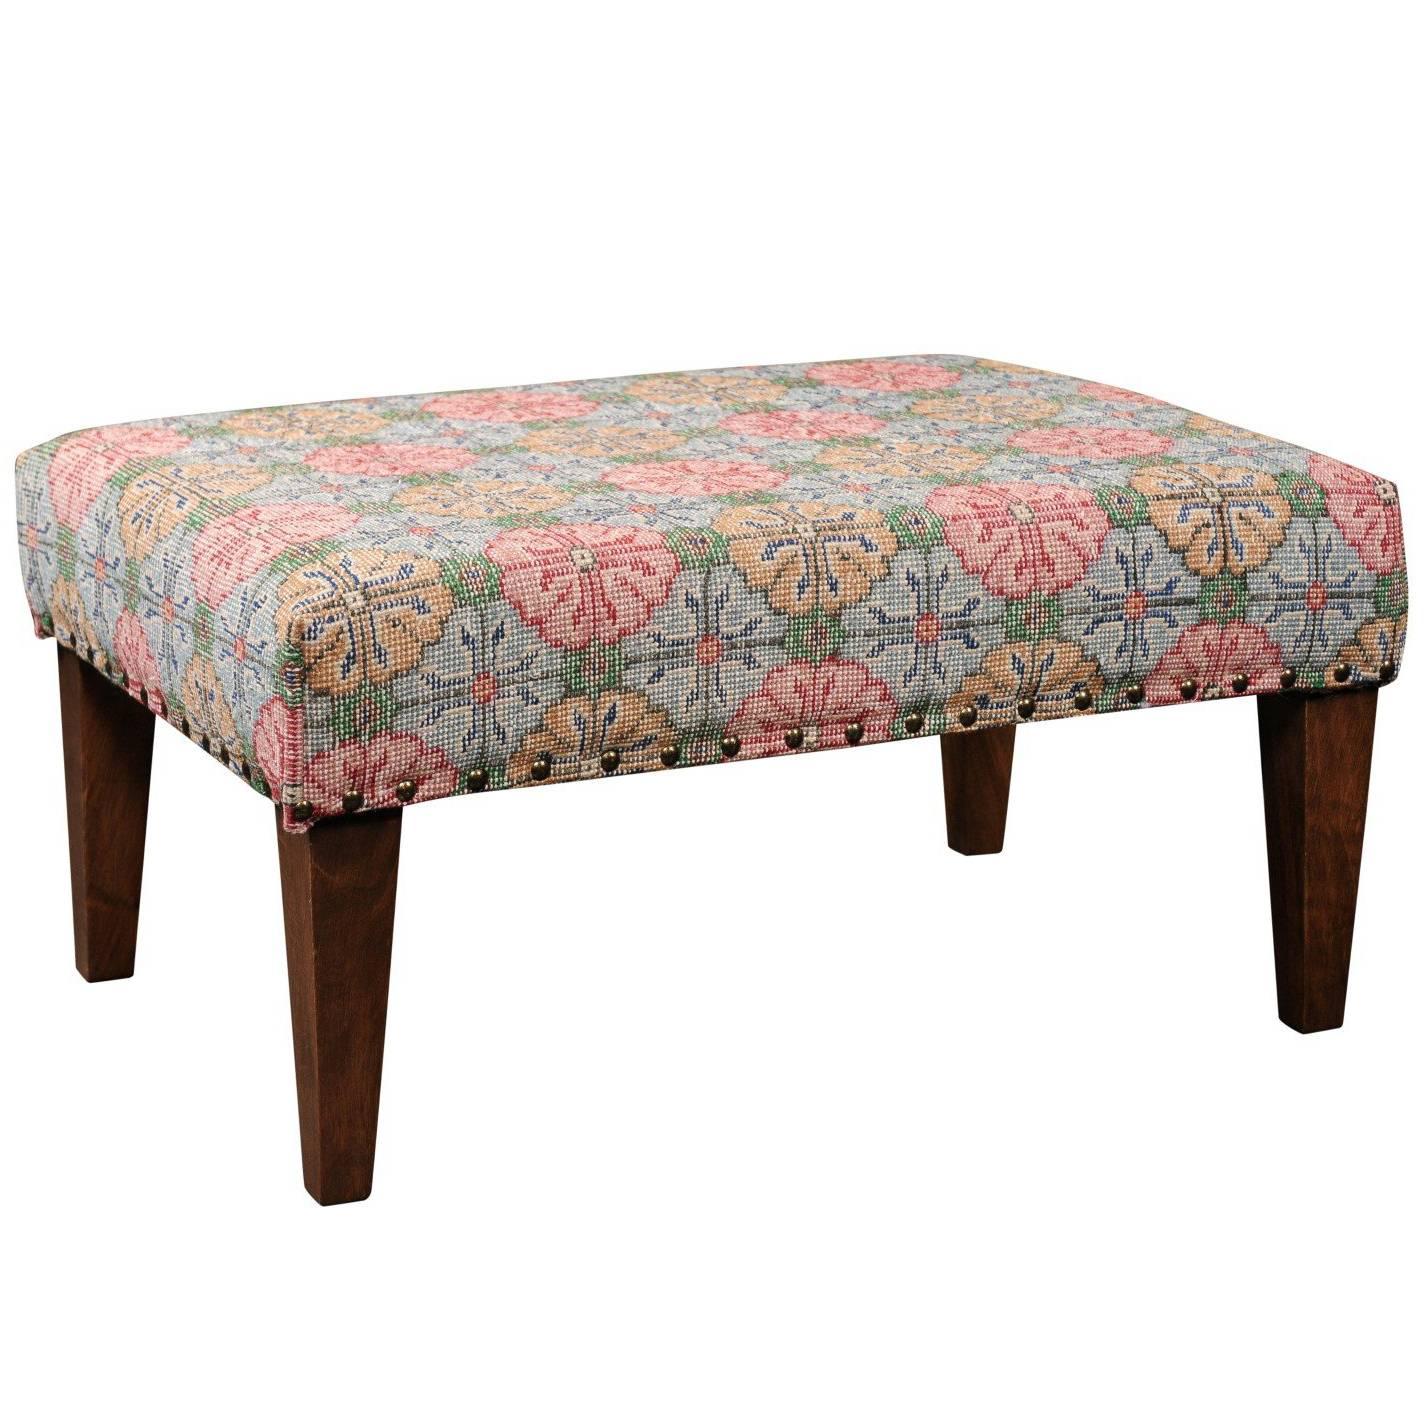 Upholstered Ottoman Made of Midcentury Colorful Turkish Rug over Custom Base For Sale